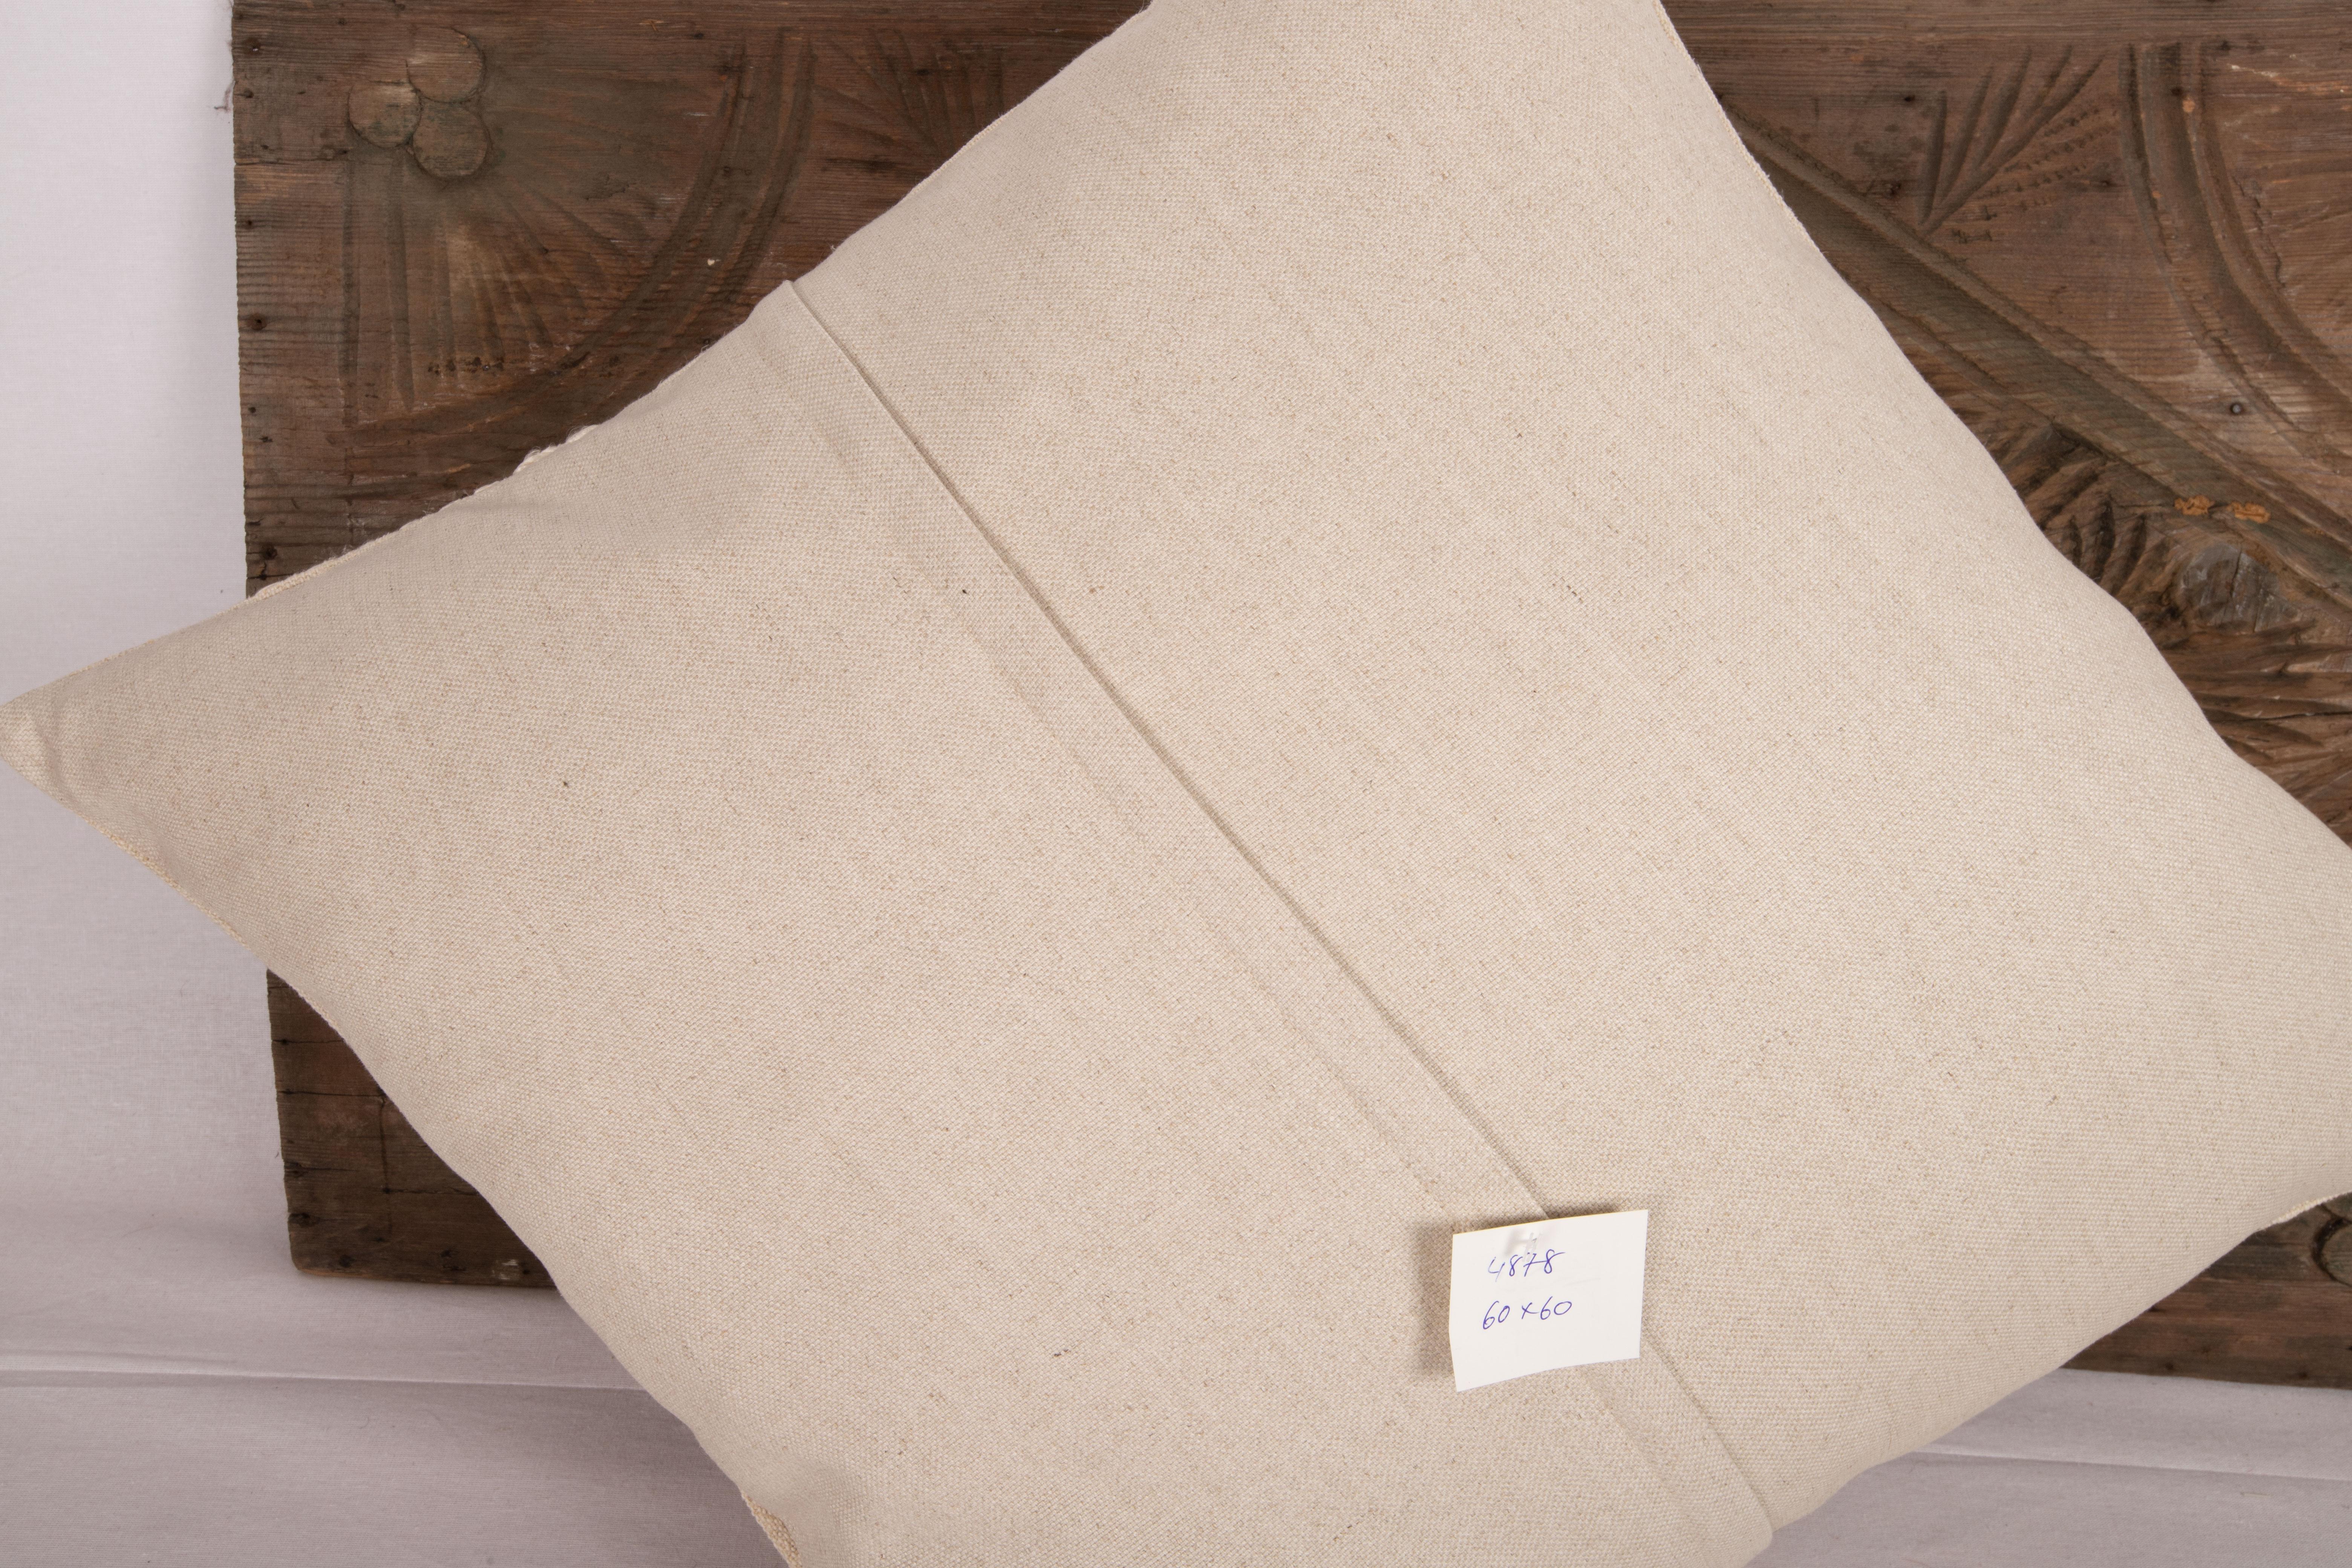 20th Century Rustic Pillow Case Made from a Vintage Anatolian Linen Fabric Mid 20th C. For Sale